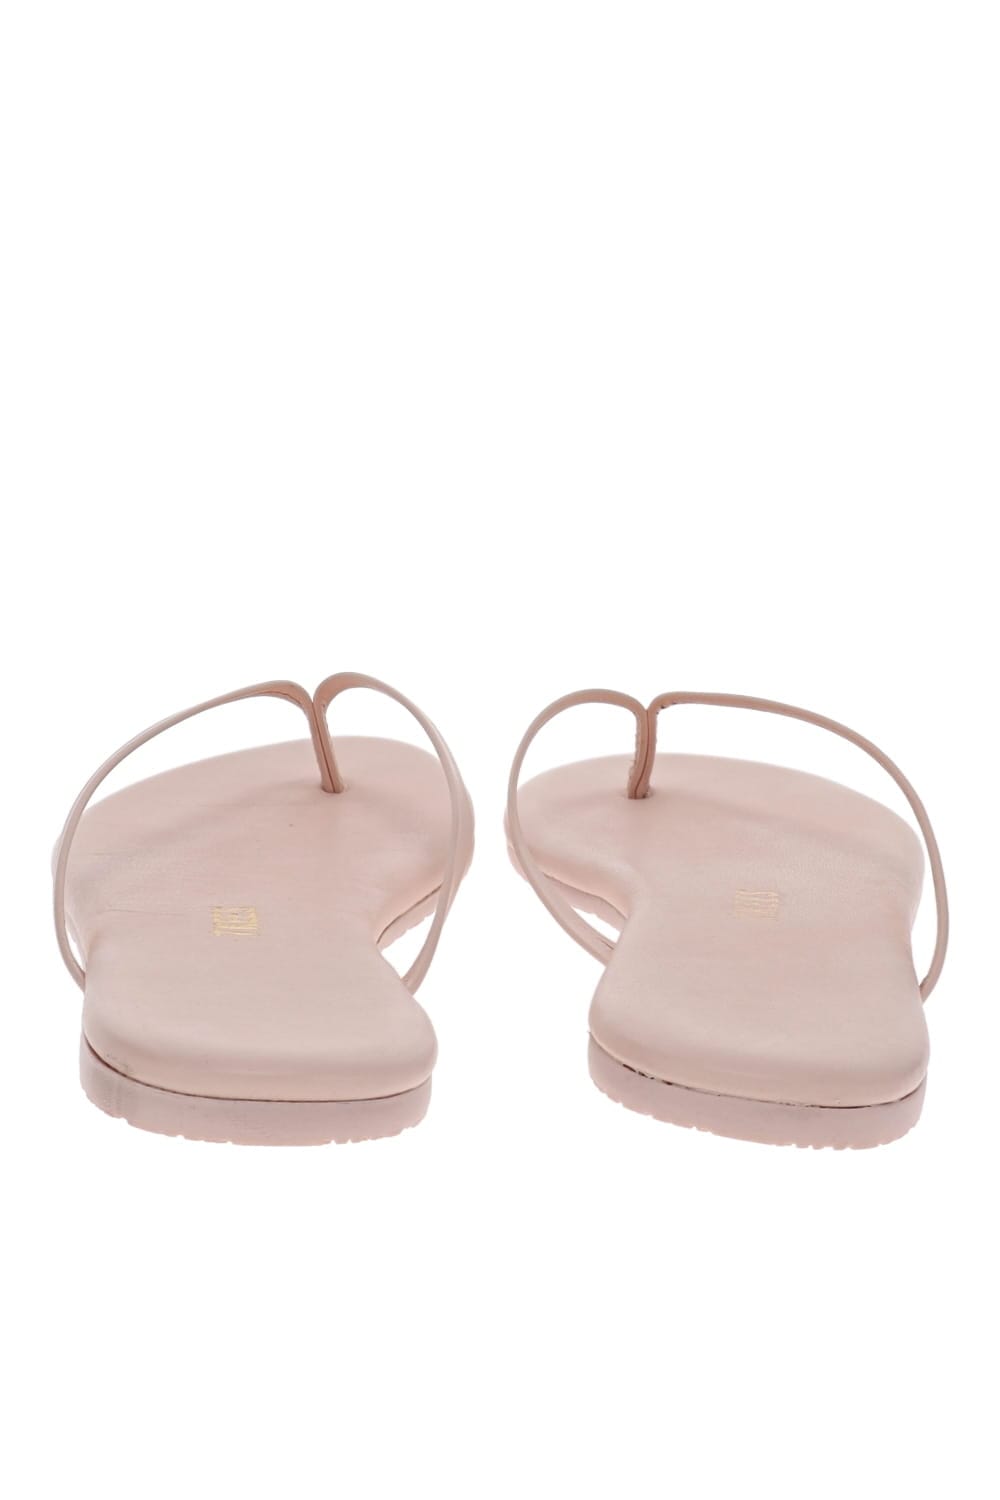 TKEES Solids Soft Pink Leather Sandal